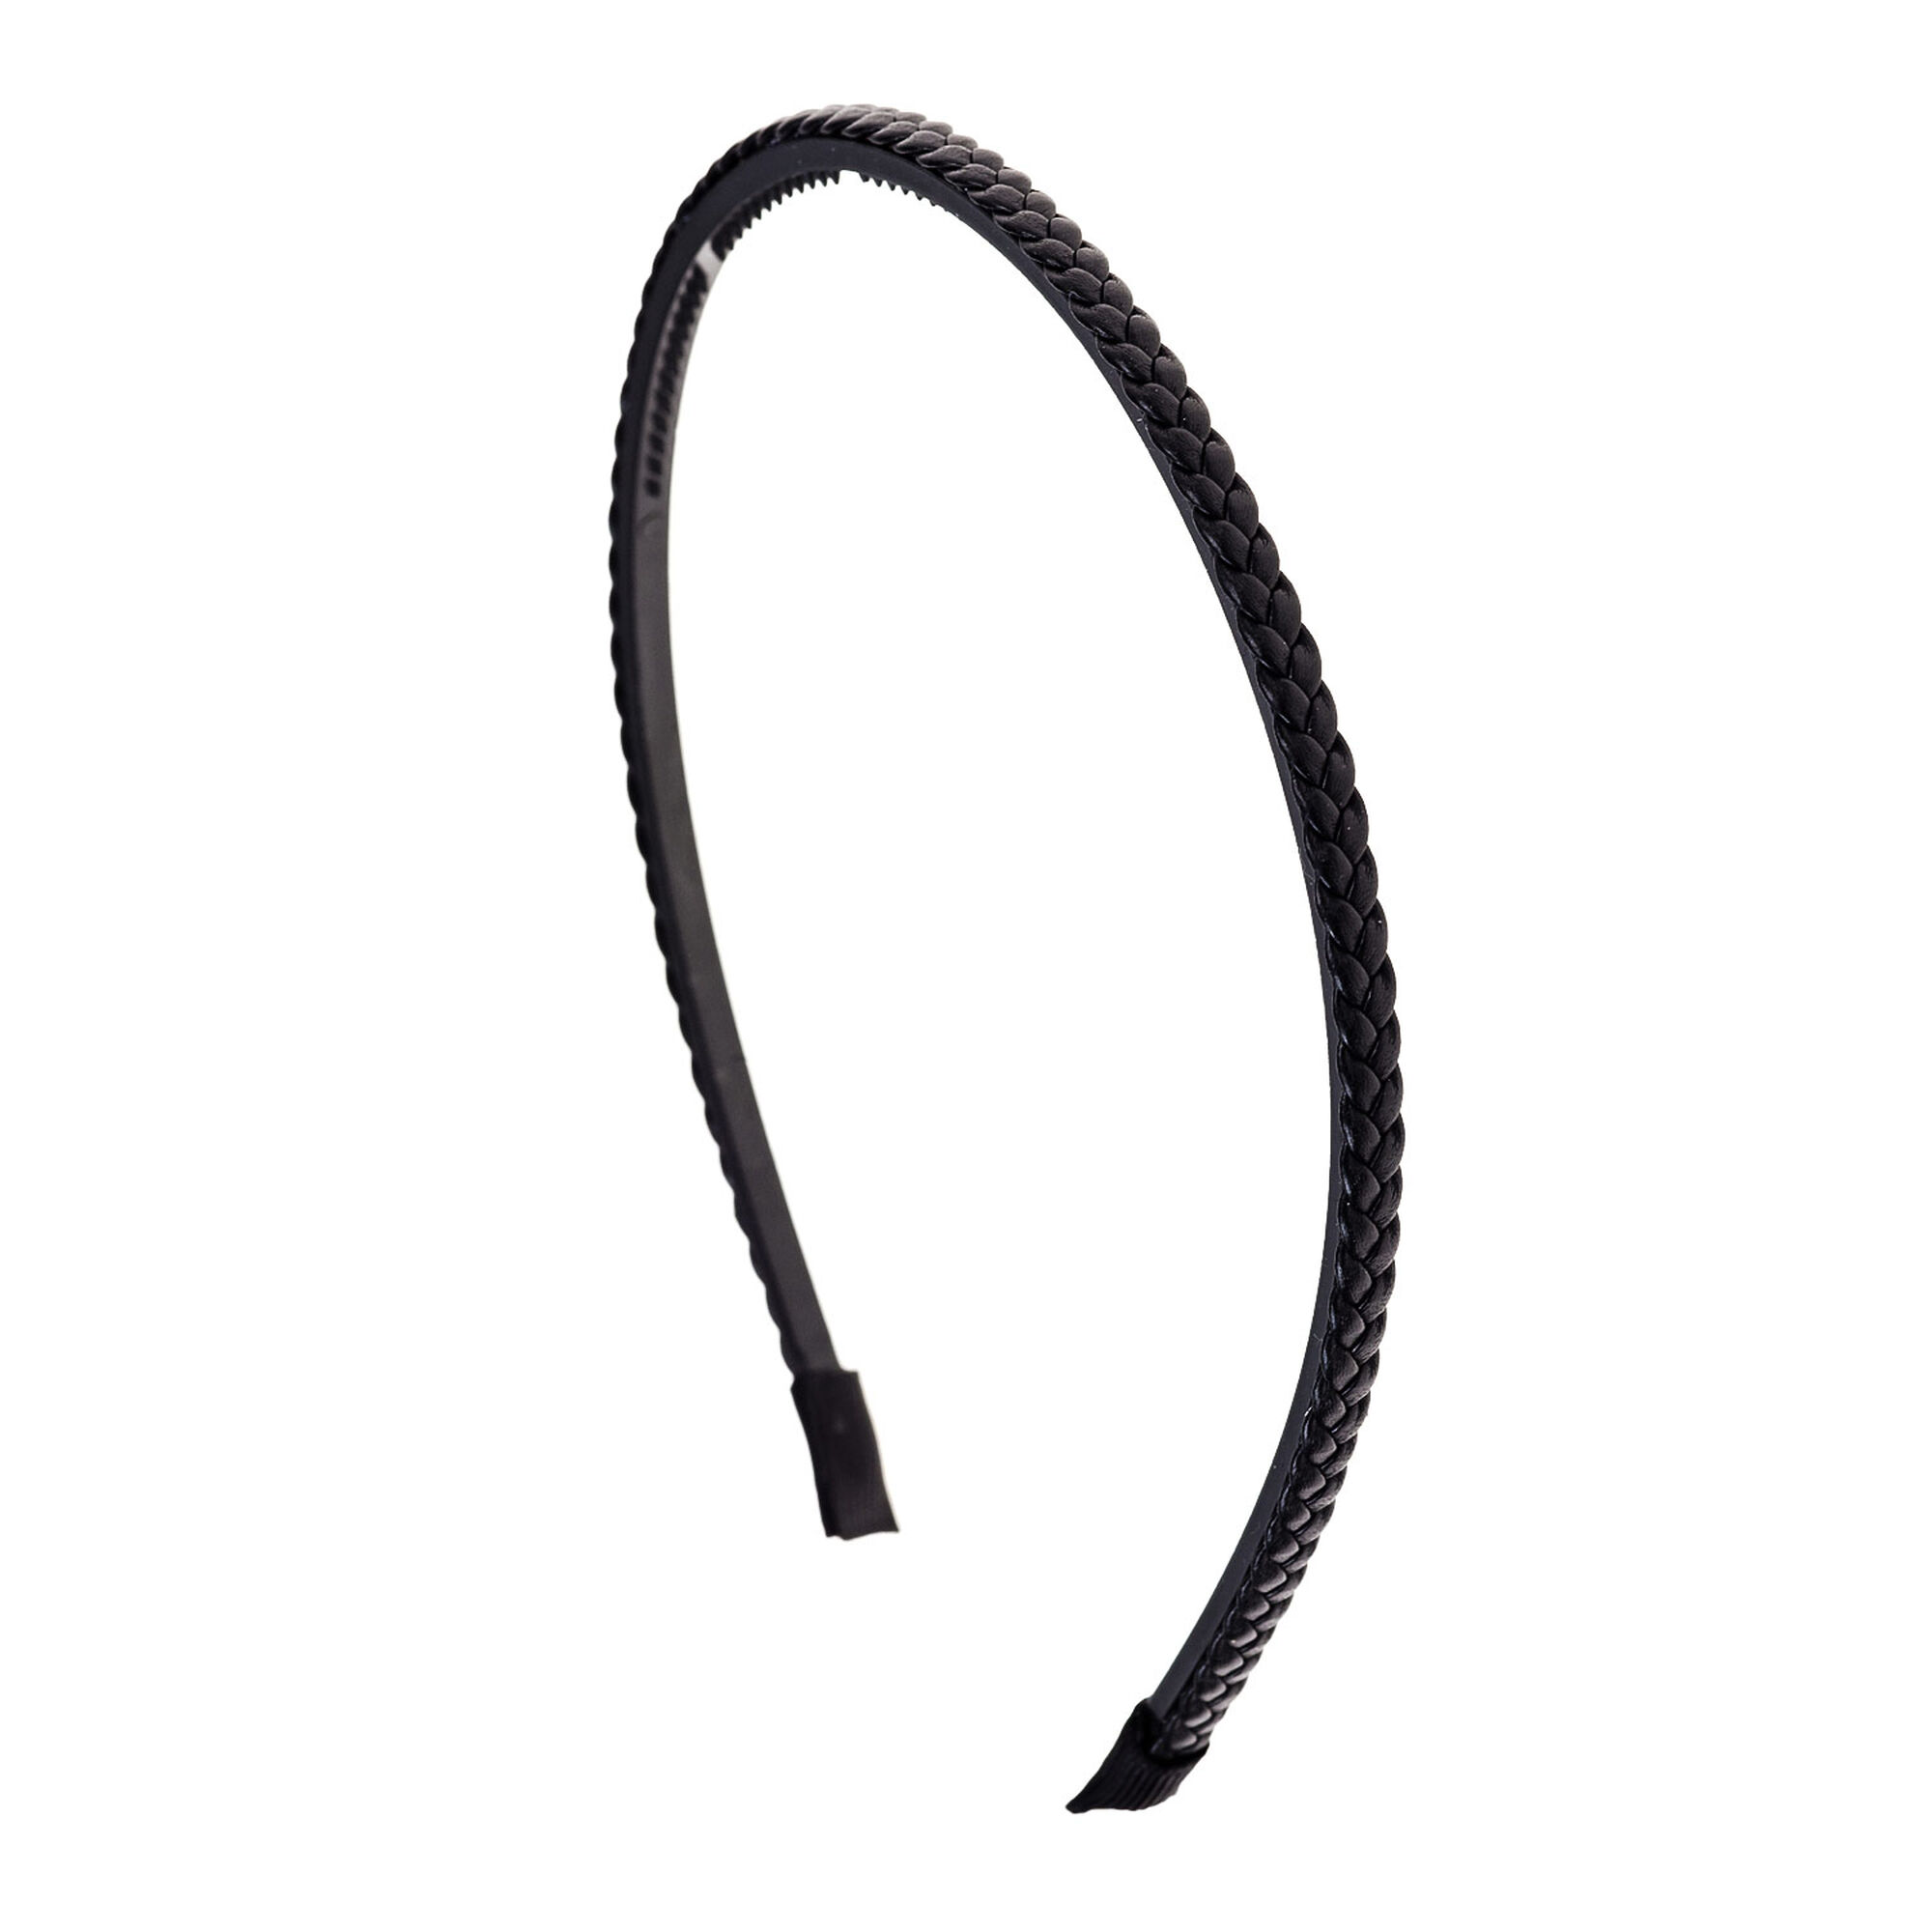 View Claires Plaited Headband Black information